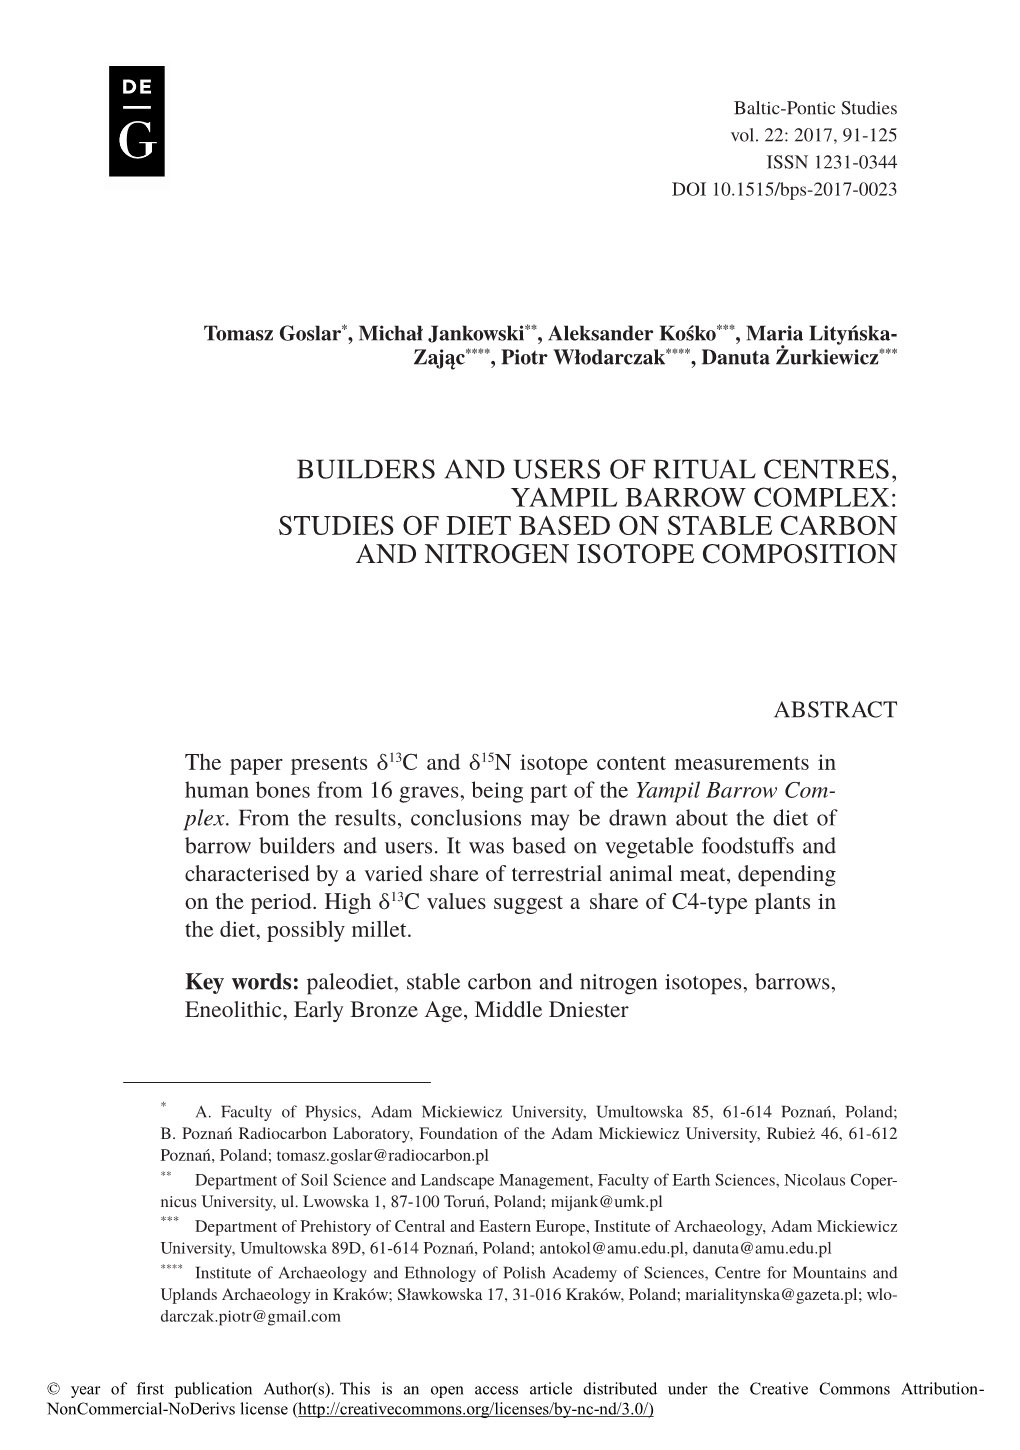 Builders and Users of Ritual Centres, Yampil Barrow Complex: Studies of Diet Based on Stable Carbon and Nitrogen Isotope Composition